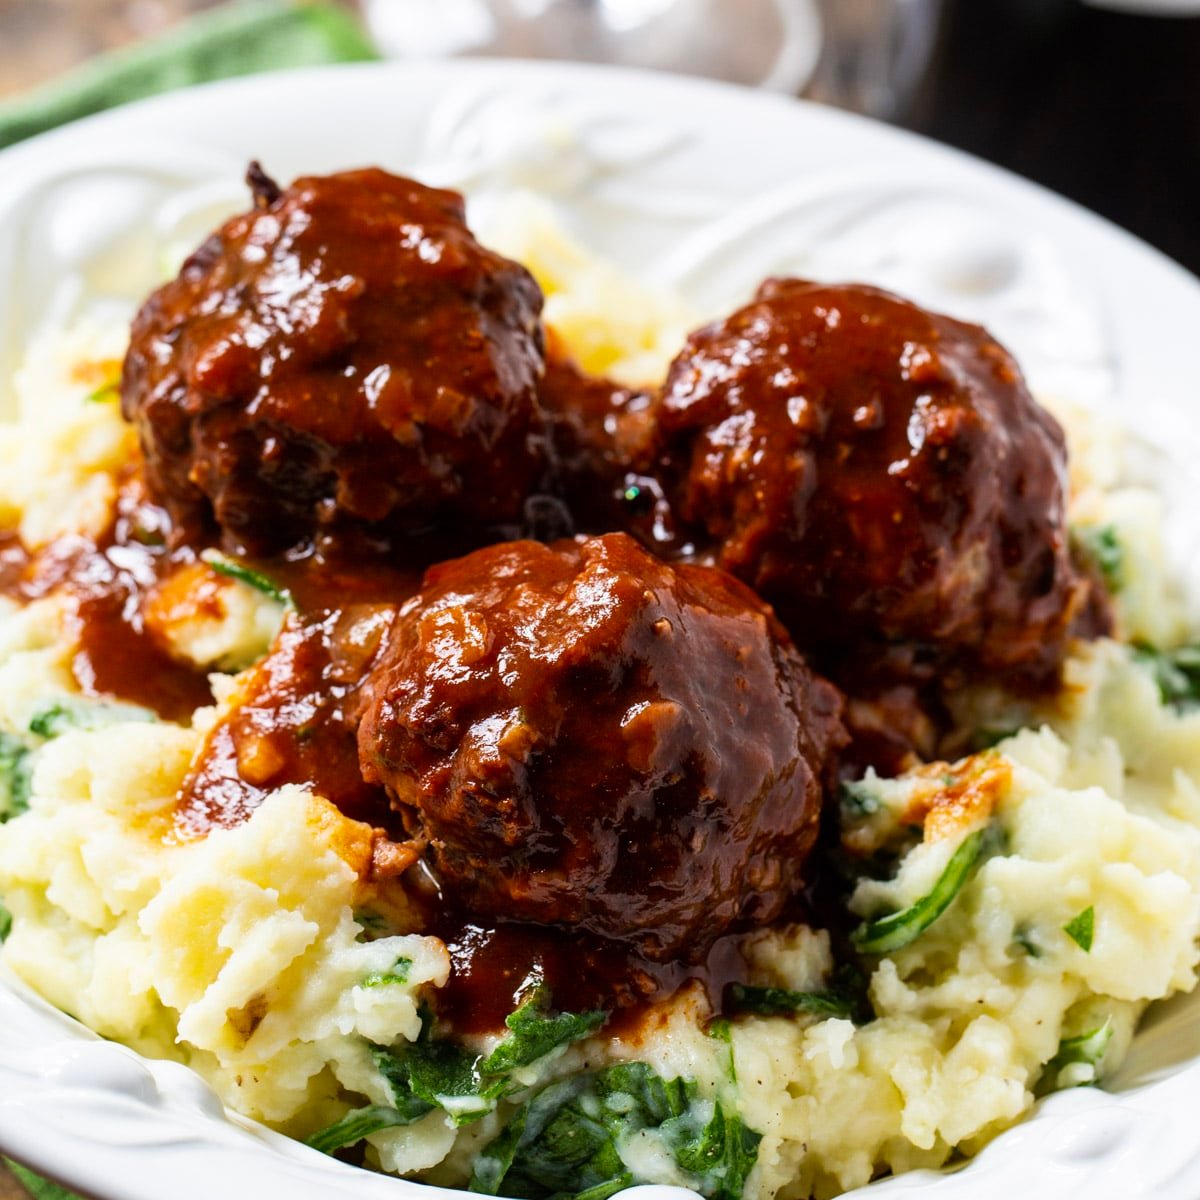 Three meatballs over spinach mashed potatoes.